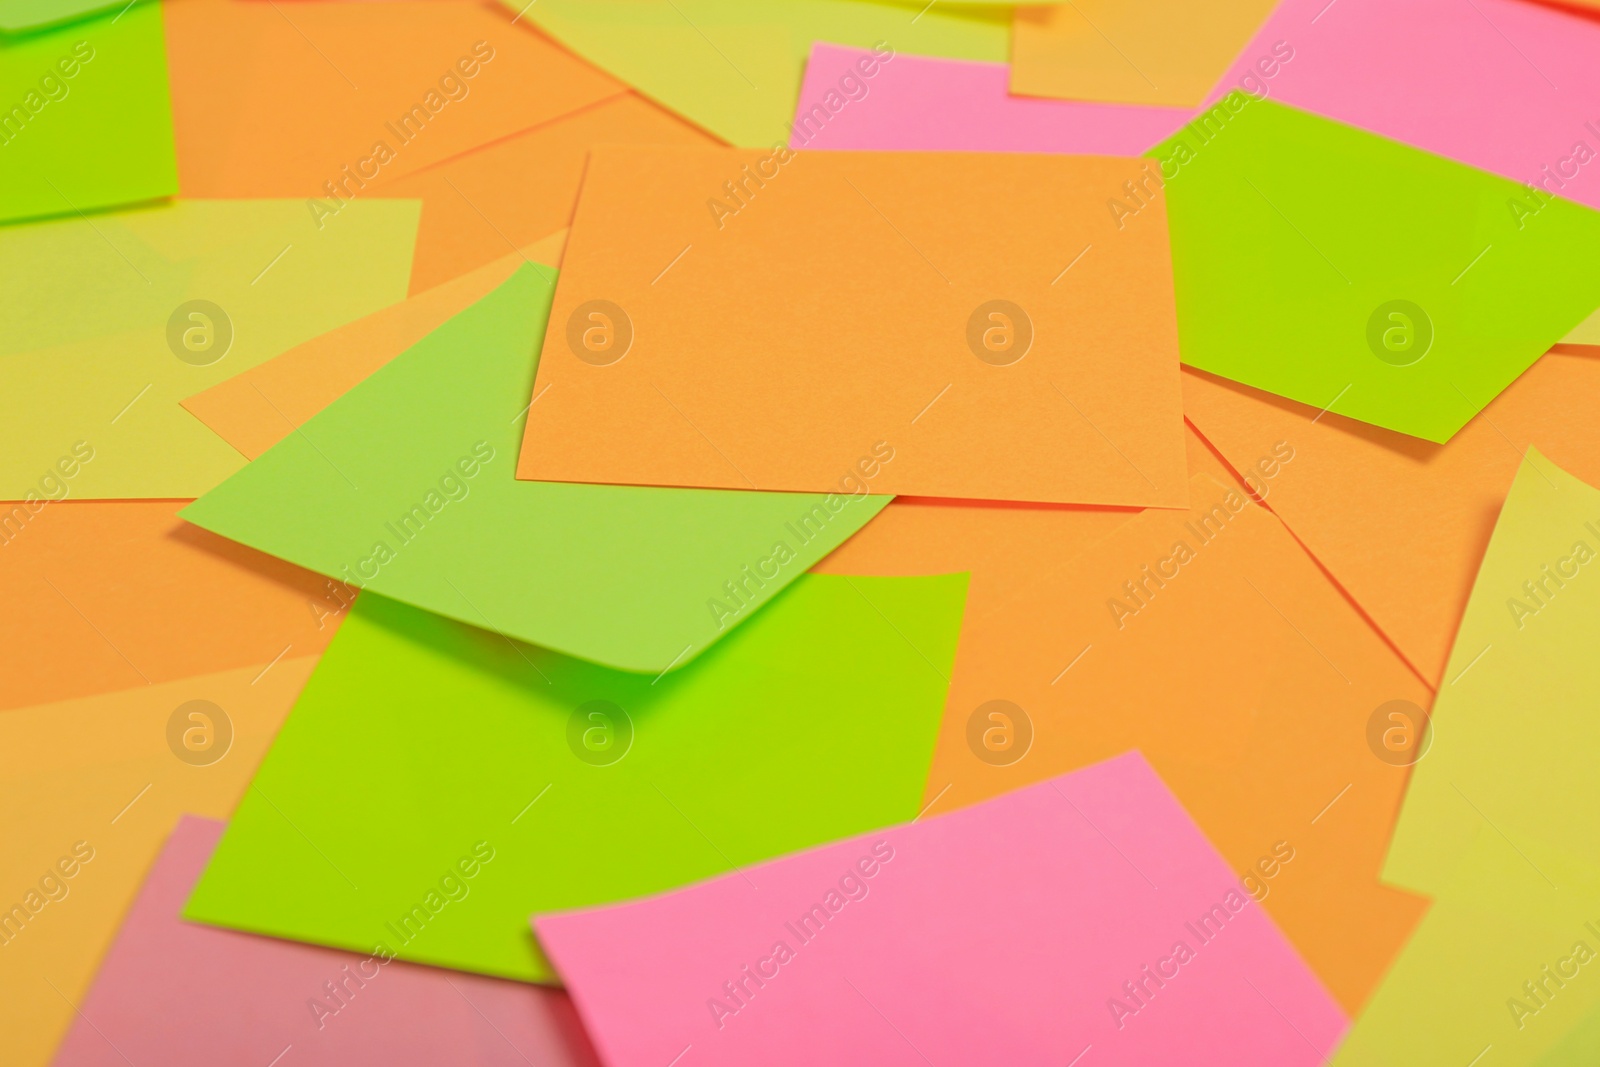 Photo of Many colorful stickers as background, closeup view